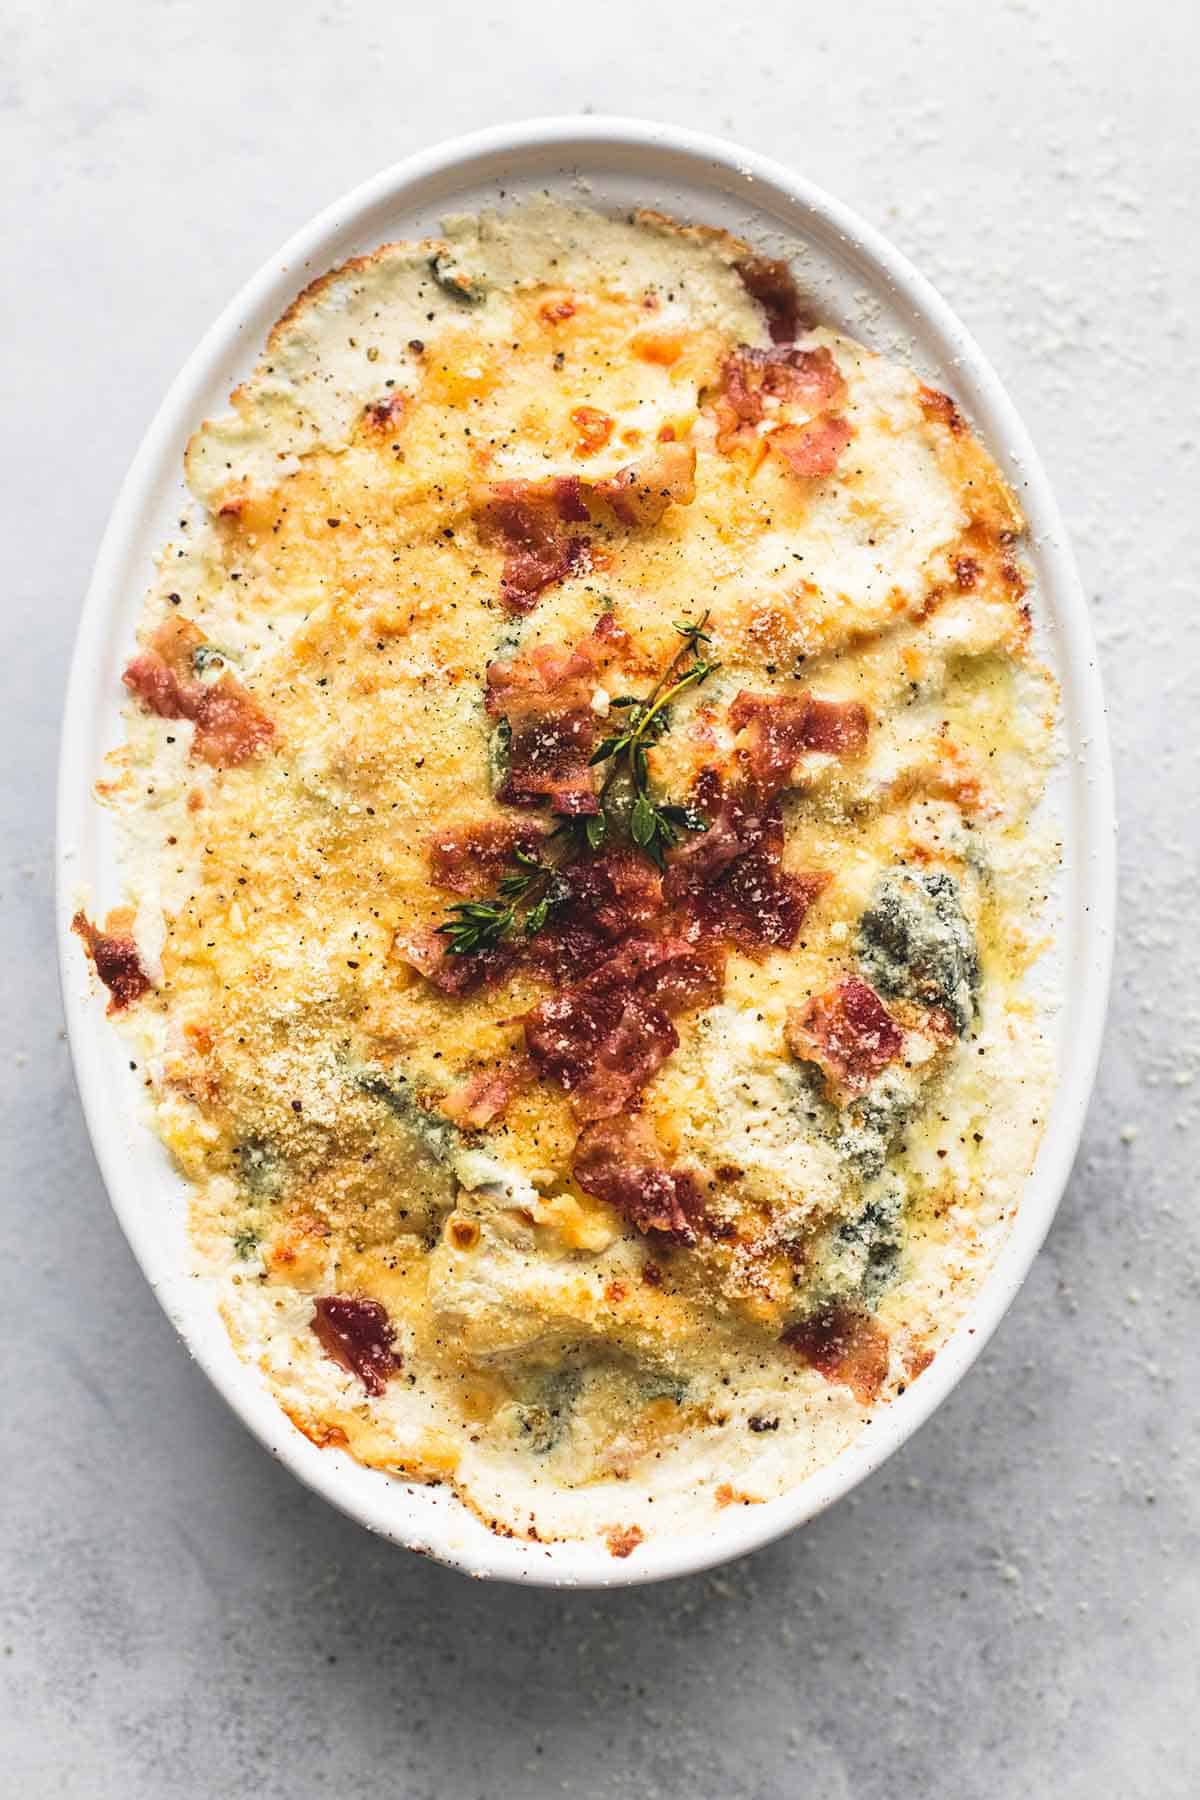 top view of ravioli alfredo bake with bacon and spinach in a serving tray.